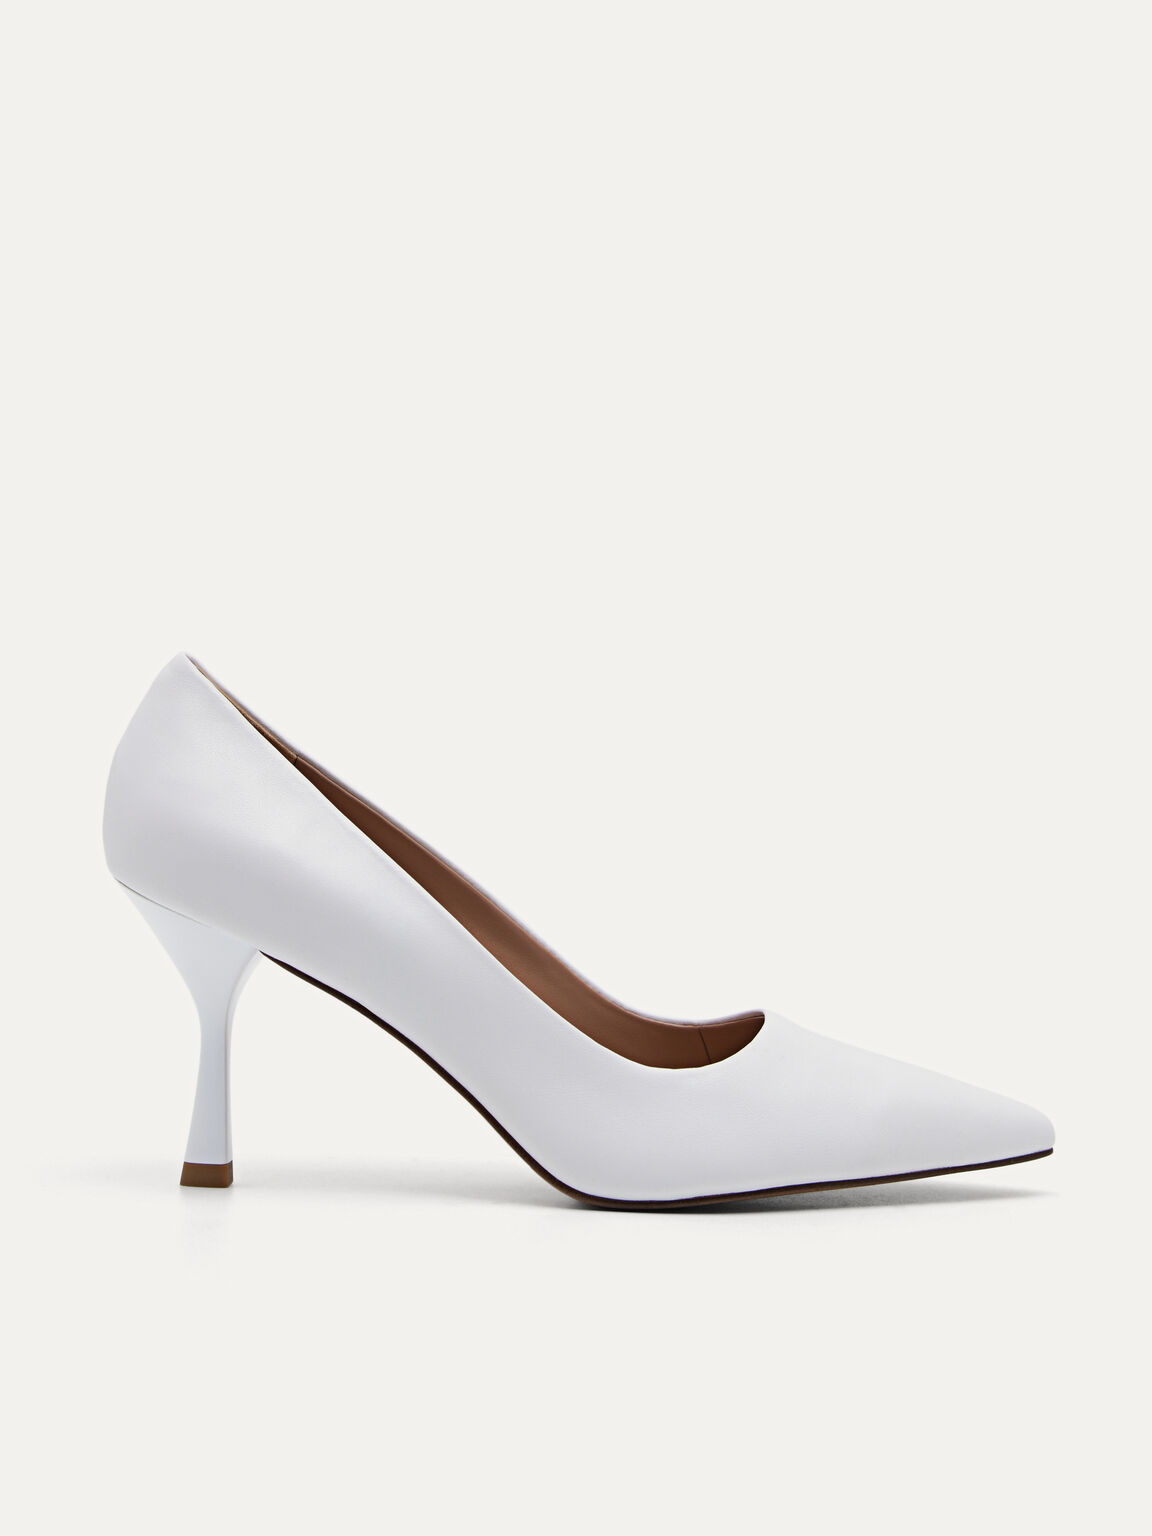 Pointed Leather Heeled Pumps, White, hi-res